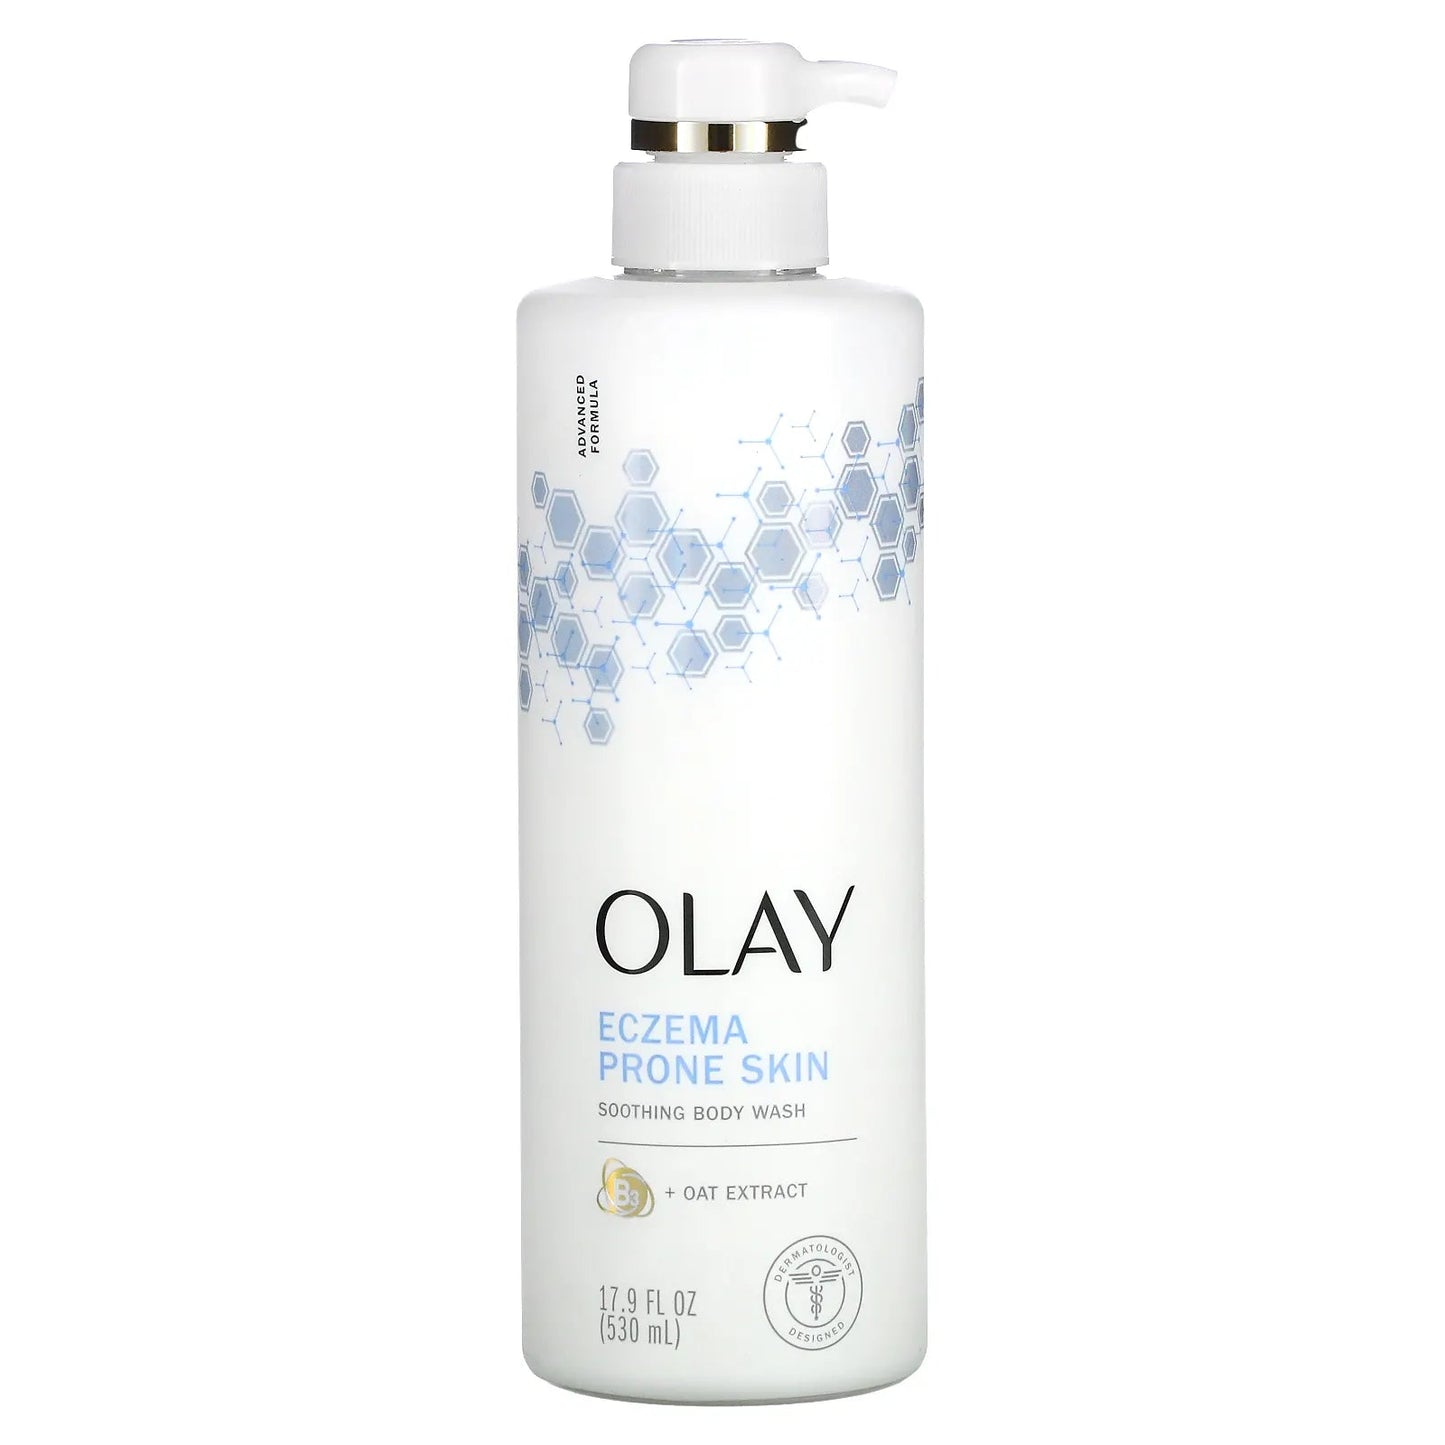 Olay Soothing Body Wash for Sensitive Skin -Ezcema Prone Skin with Oat Extract, 17.9 fl oz - 530 ml - Ome's Beauty Mart